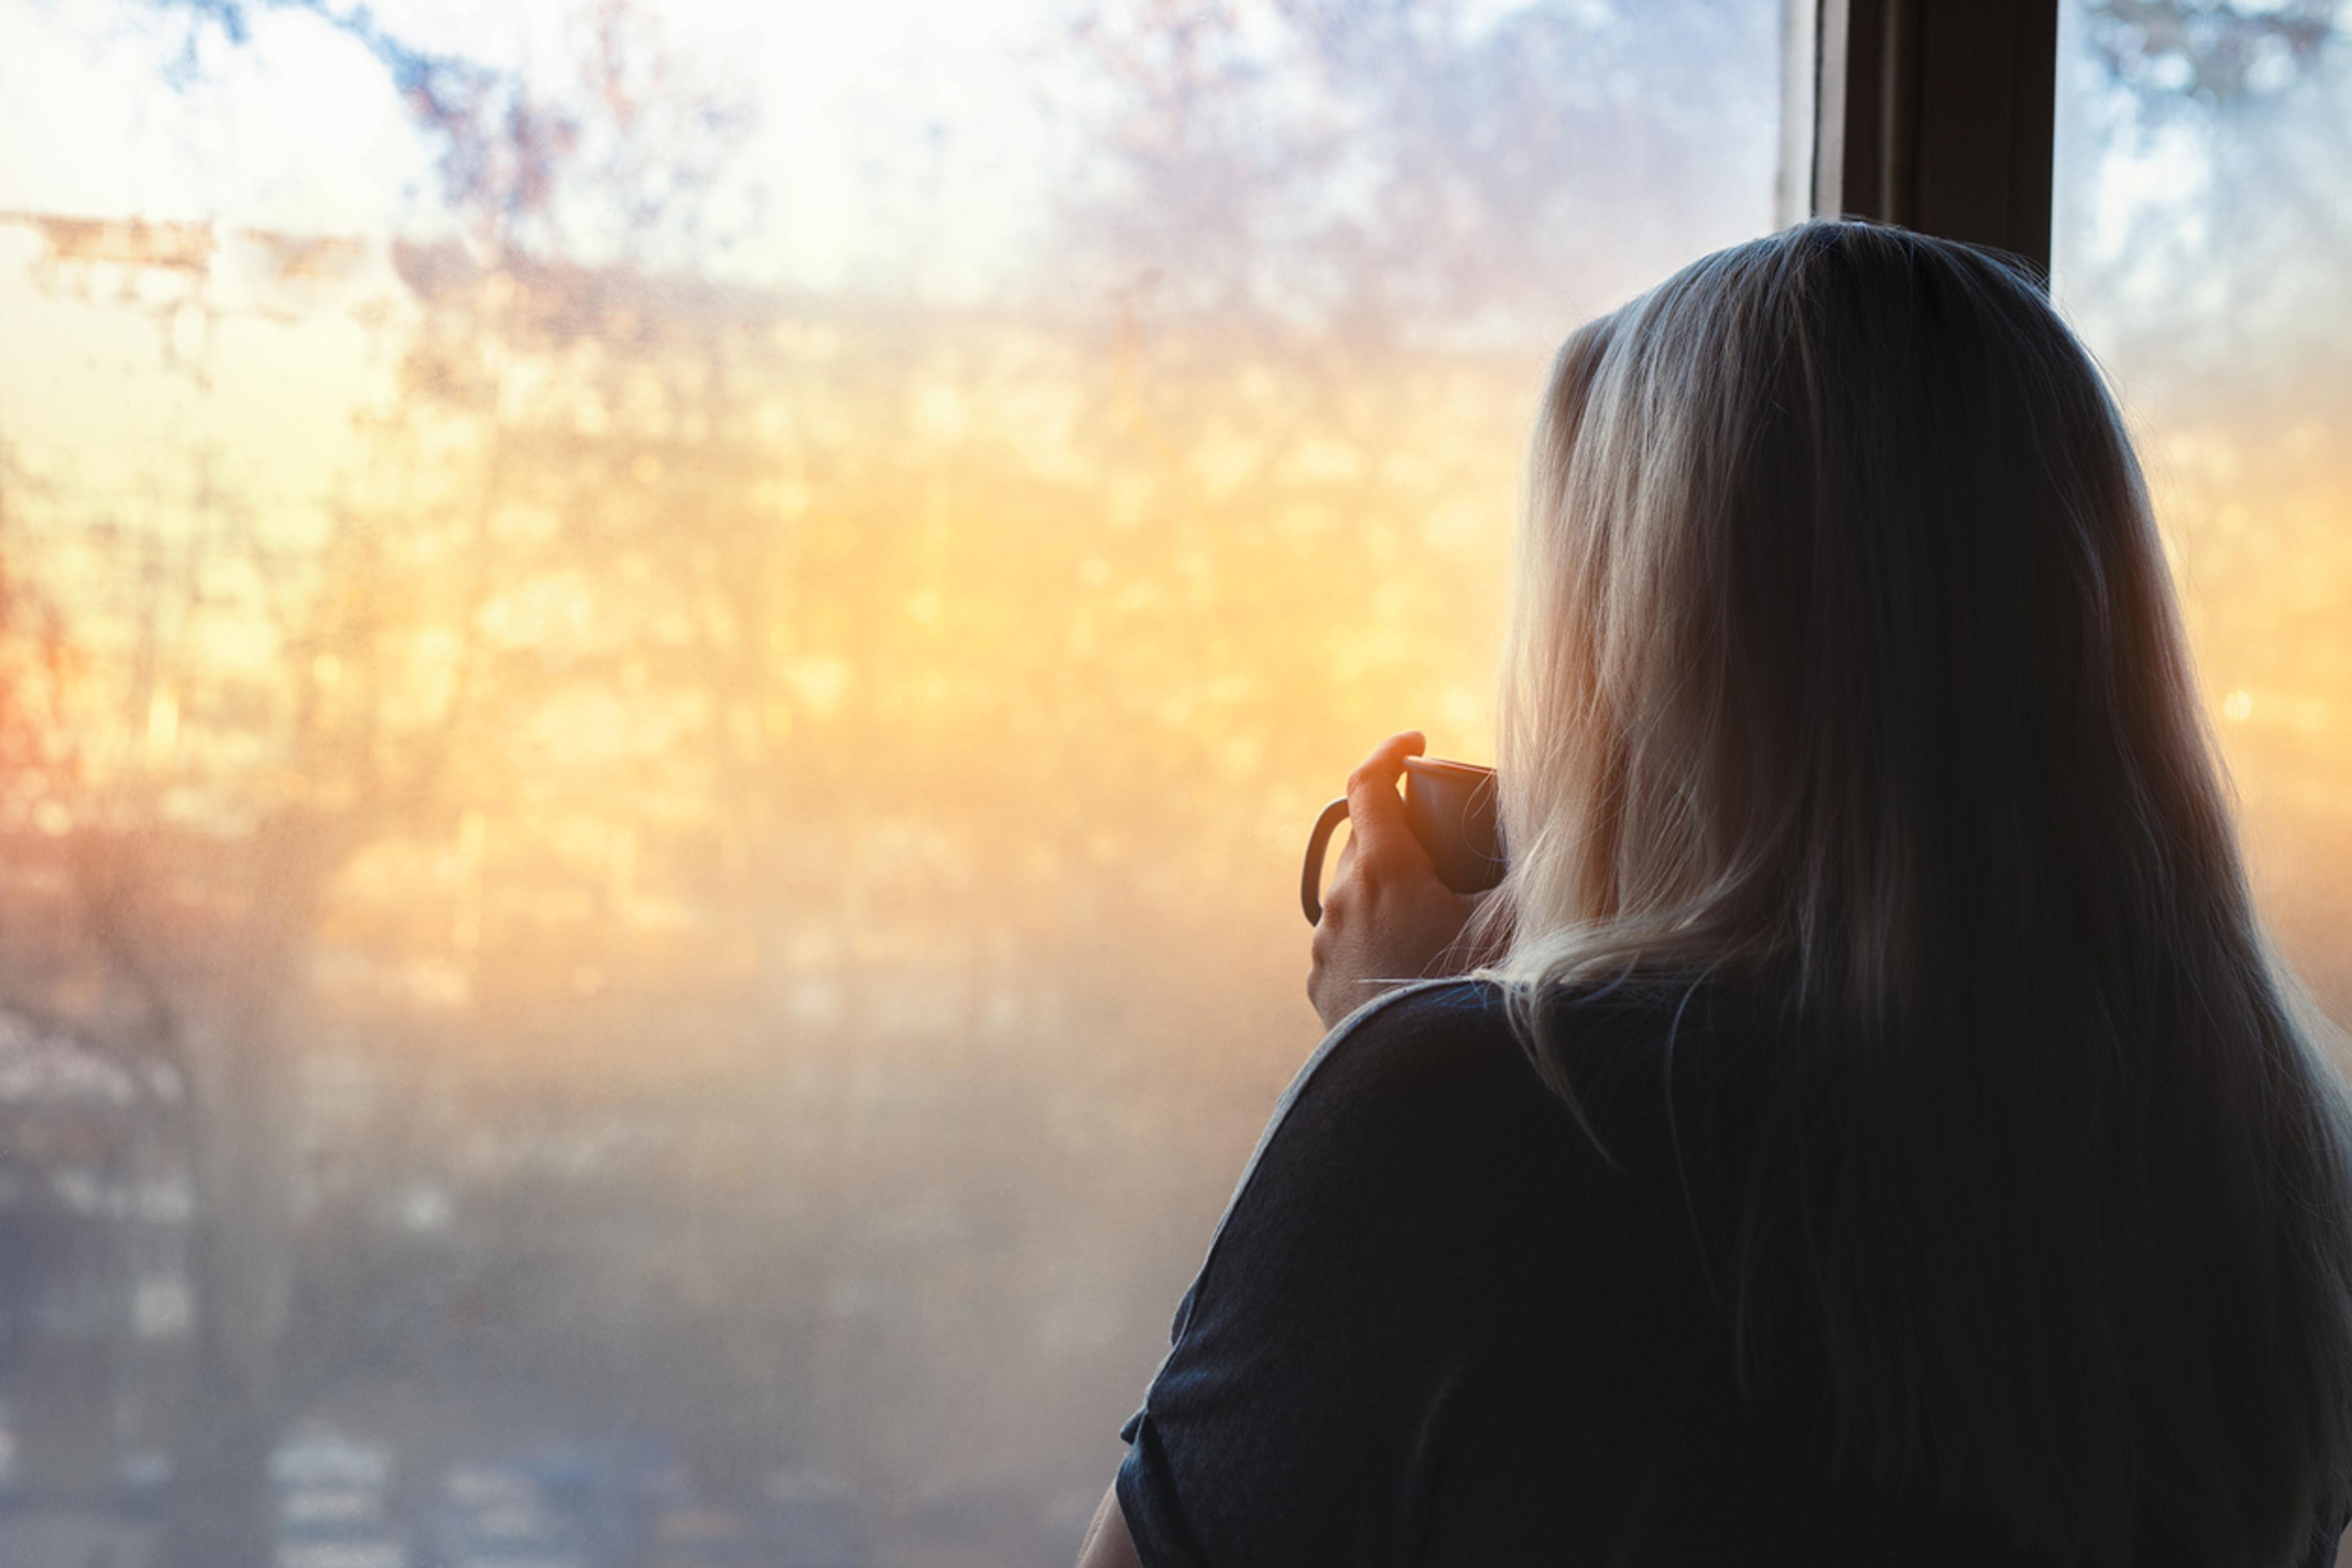 A woman looking out of a window holding a mug in her hand. Through the window is a hazy scene of winter sunshine.